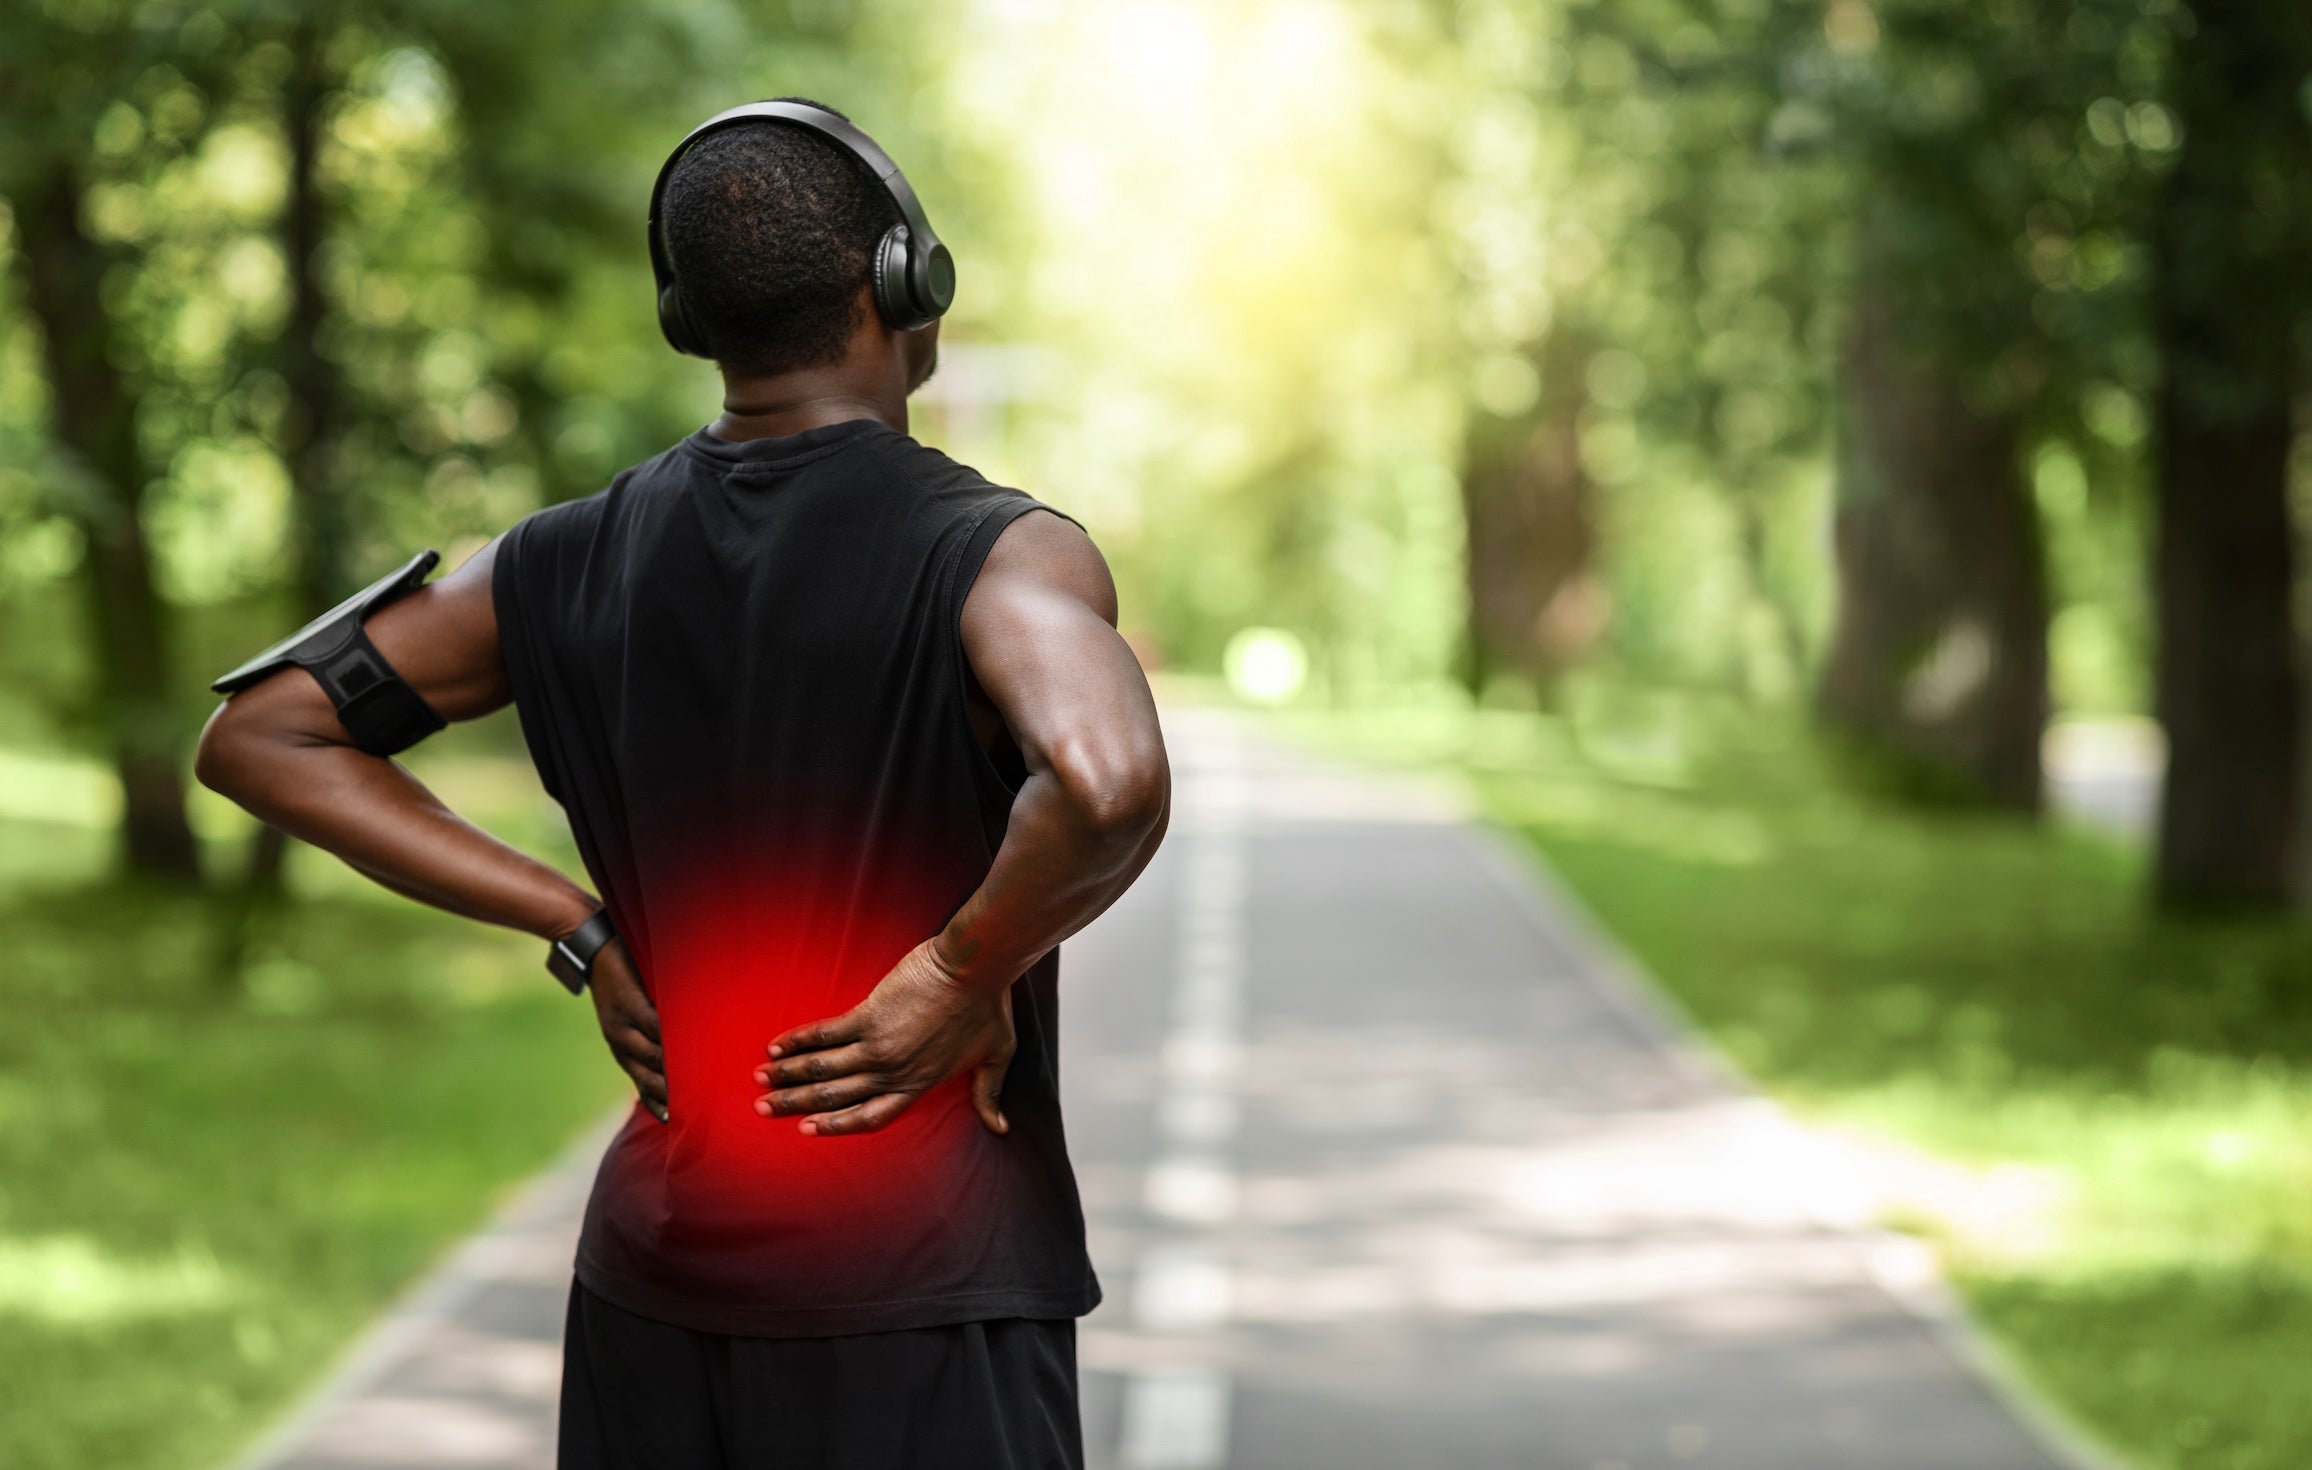 Lower back pain while running